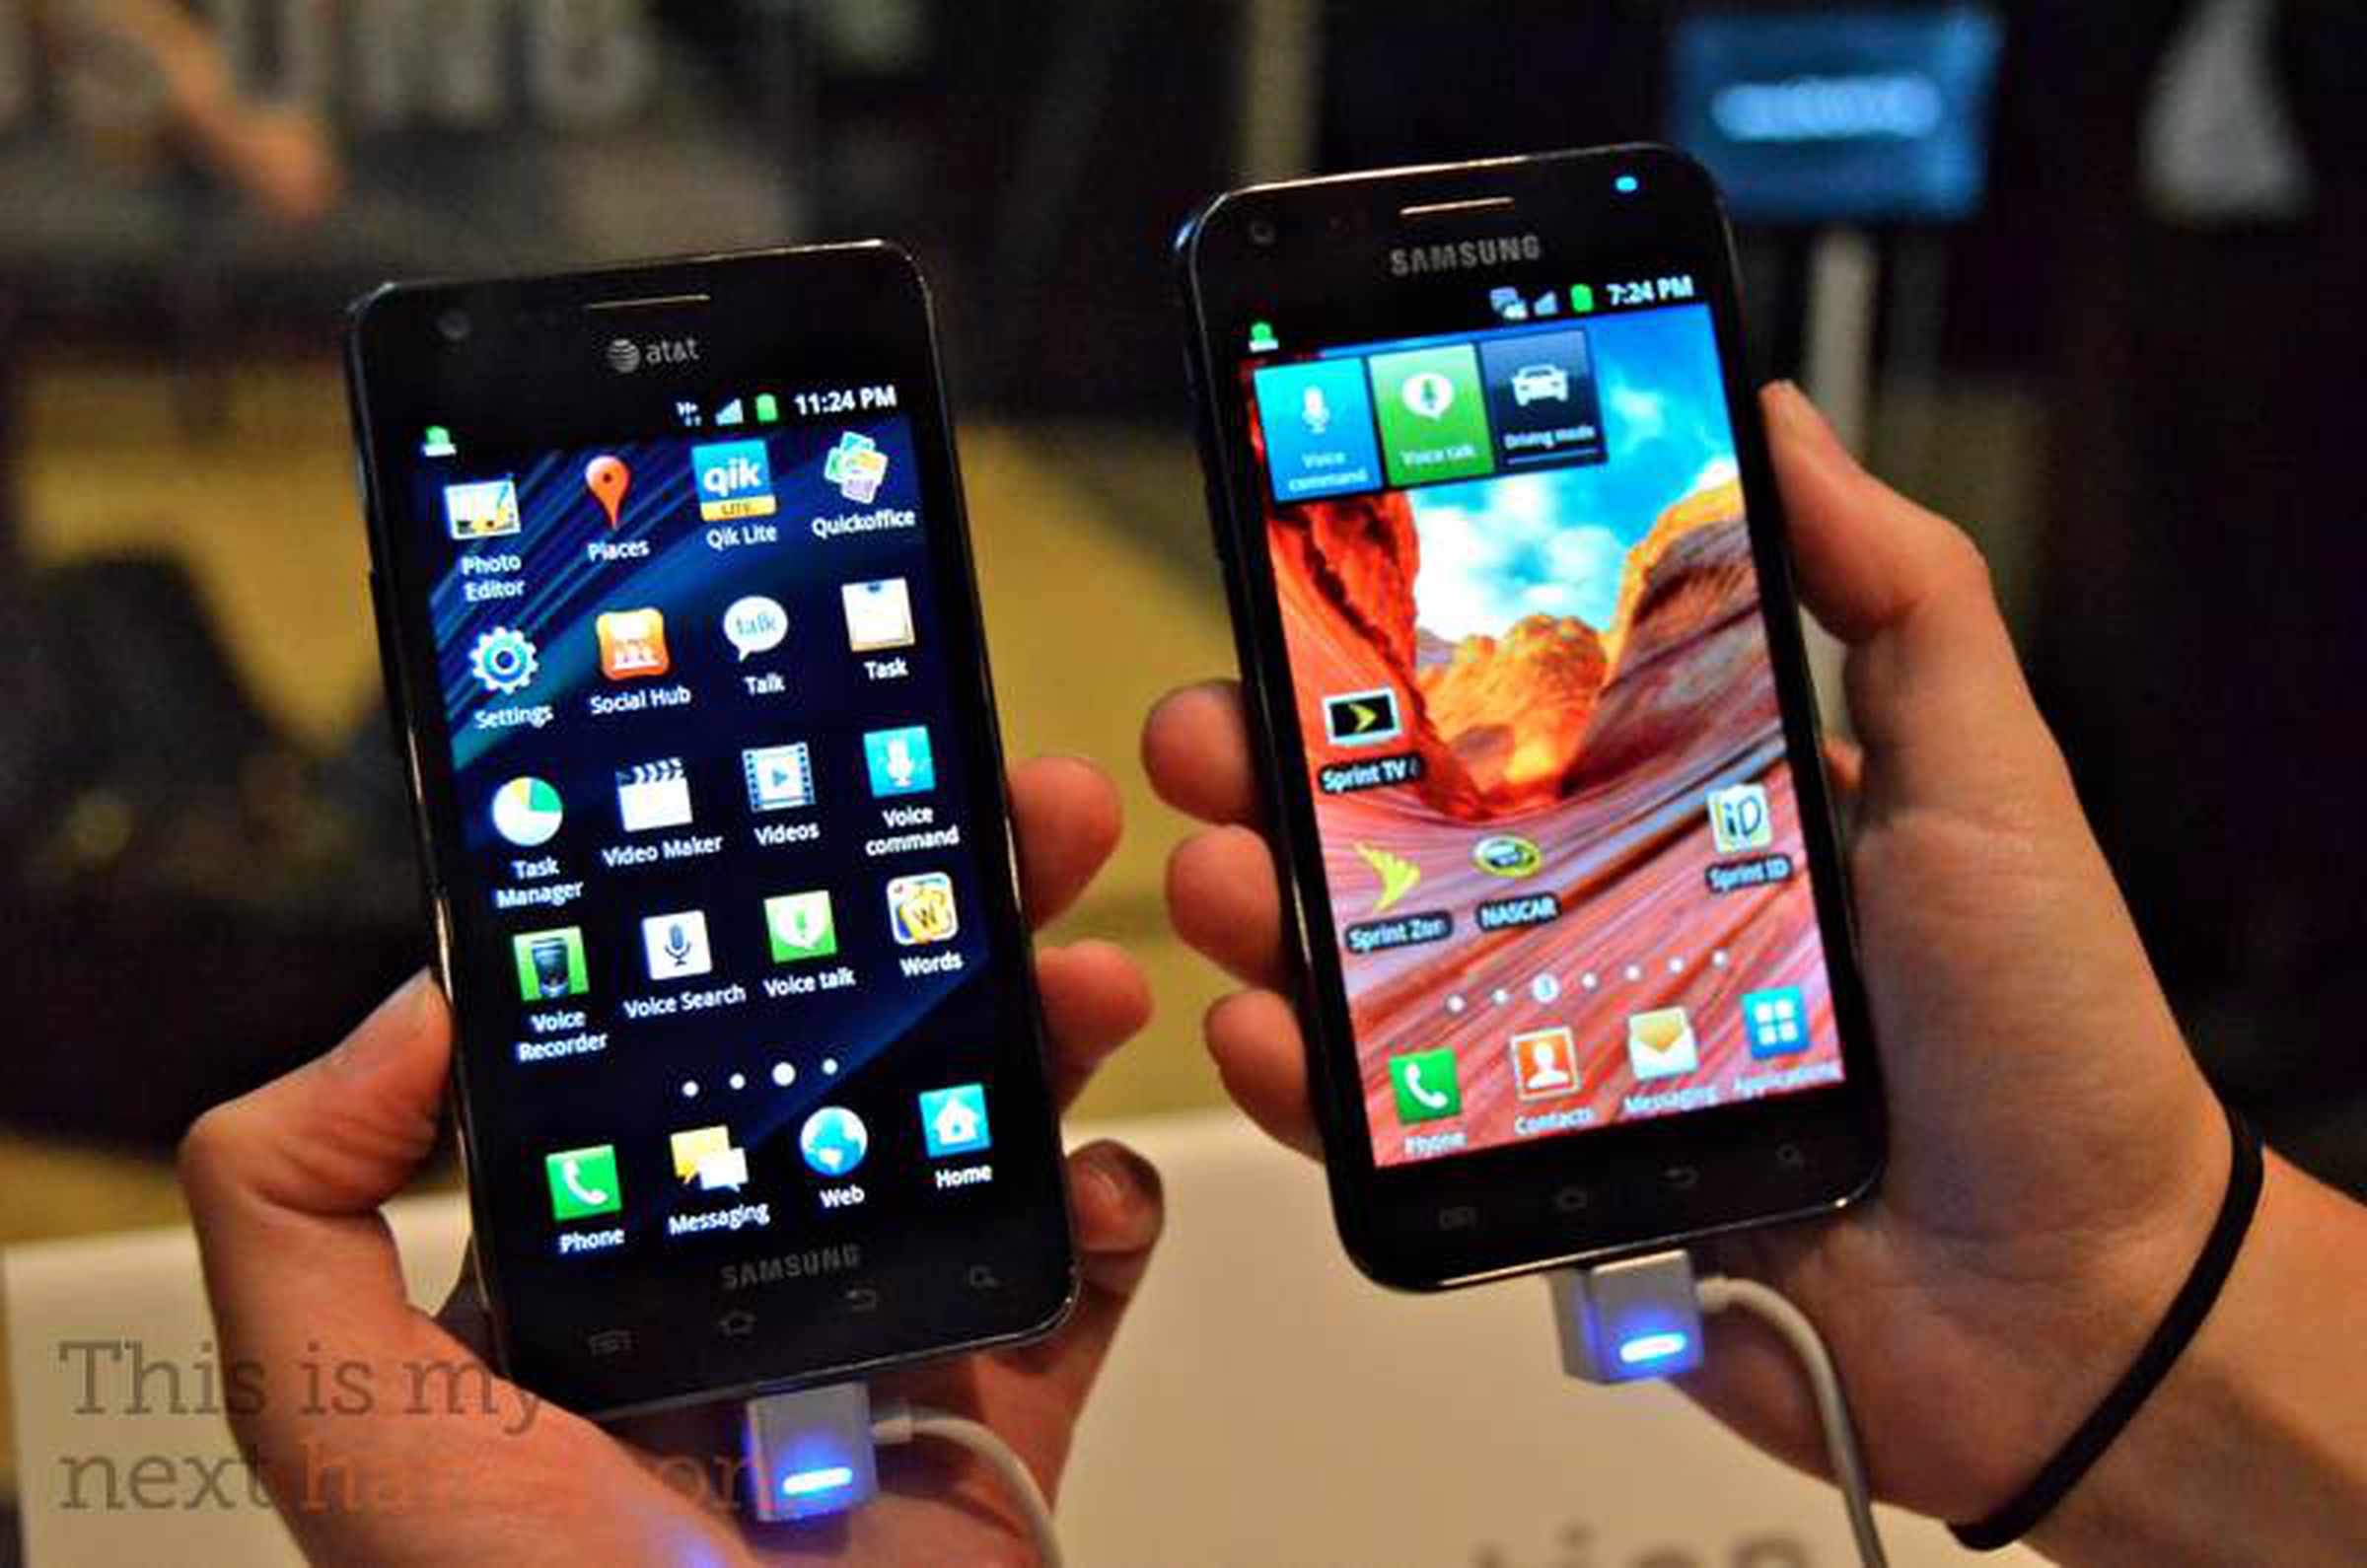 Galaxy S II family portrait: AT&T, Sprint, and T-Mobile